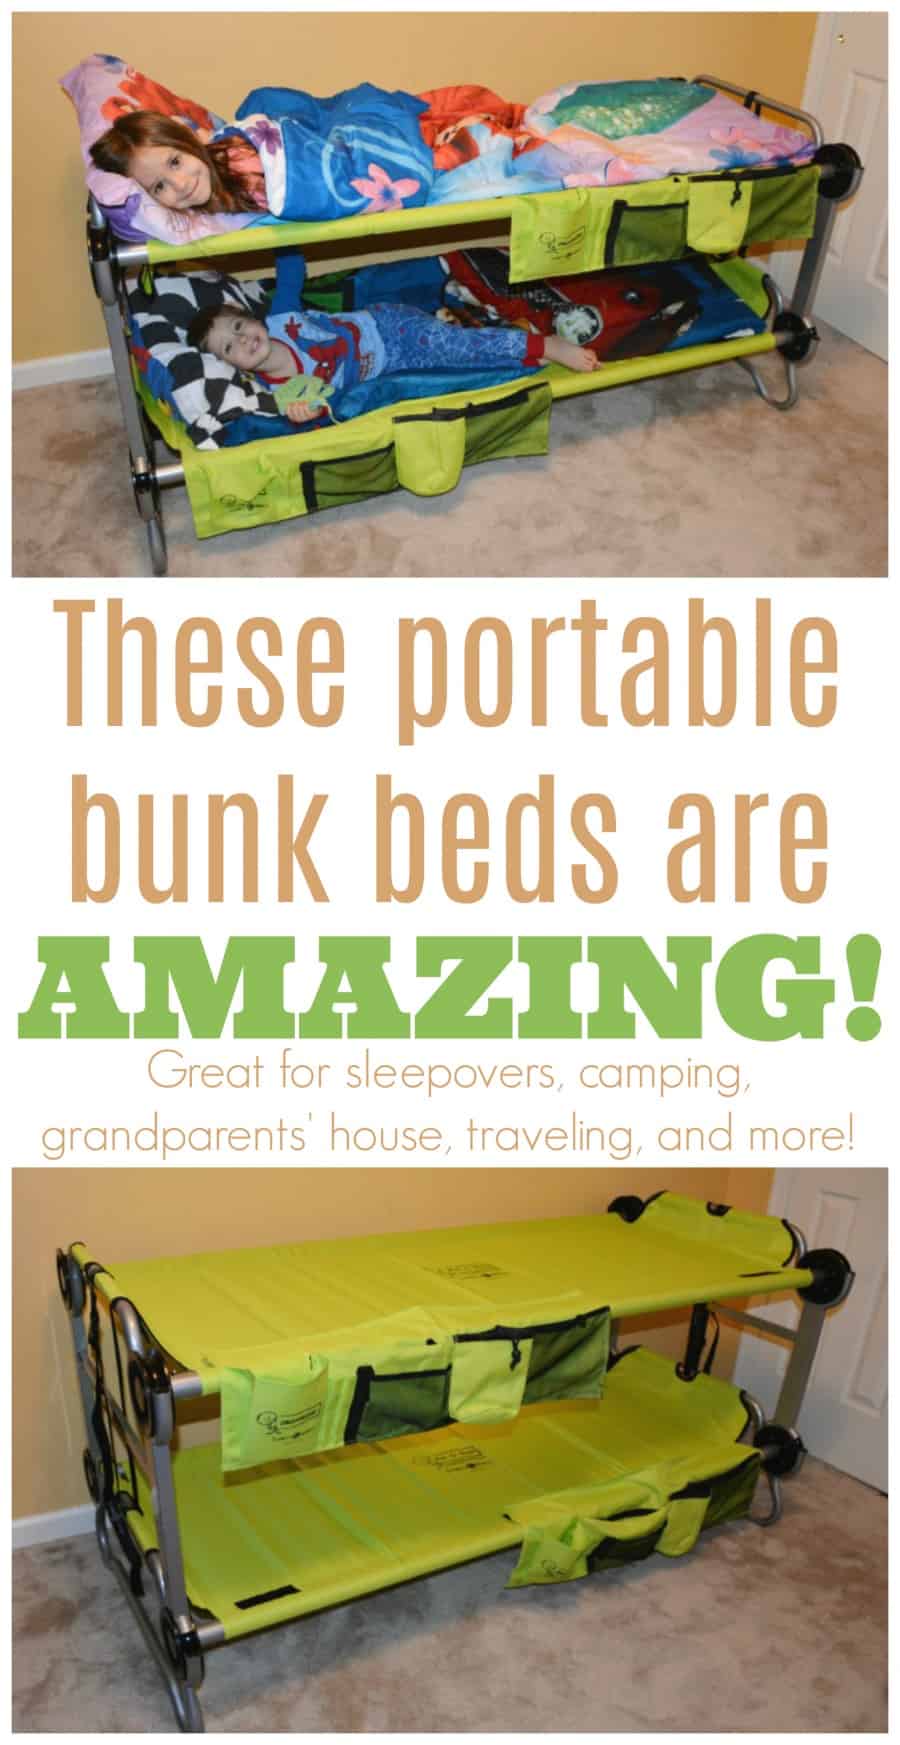 These portable bunk beds are amazing!